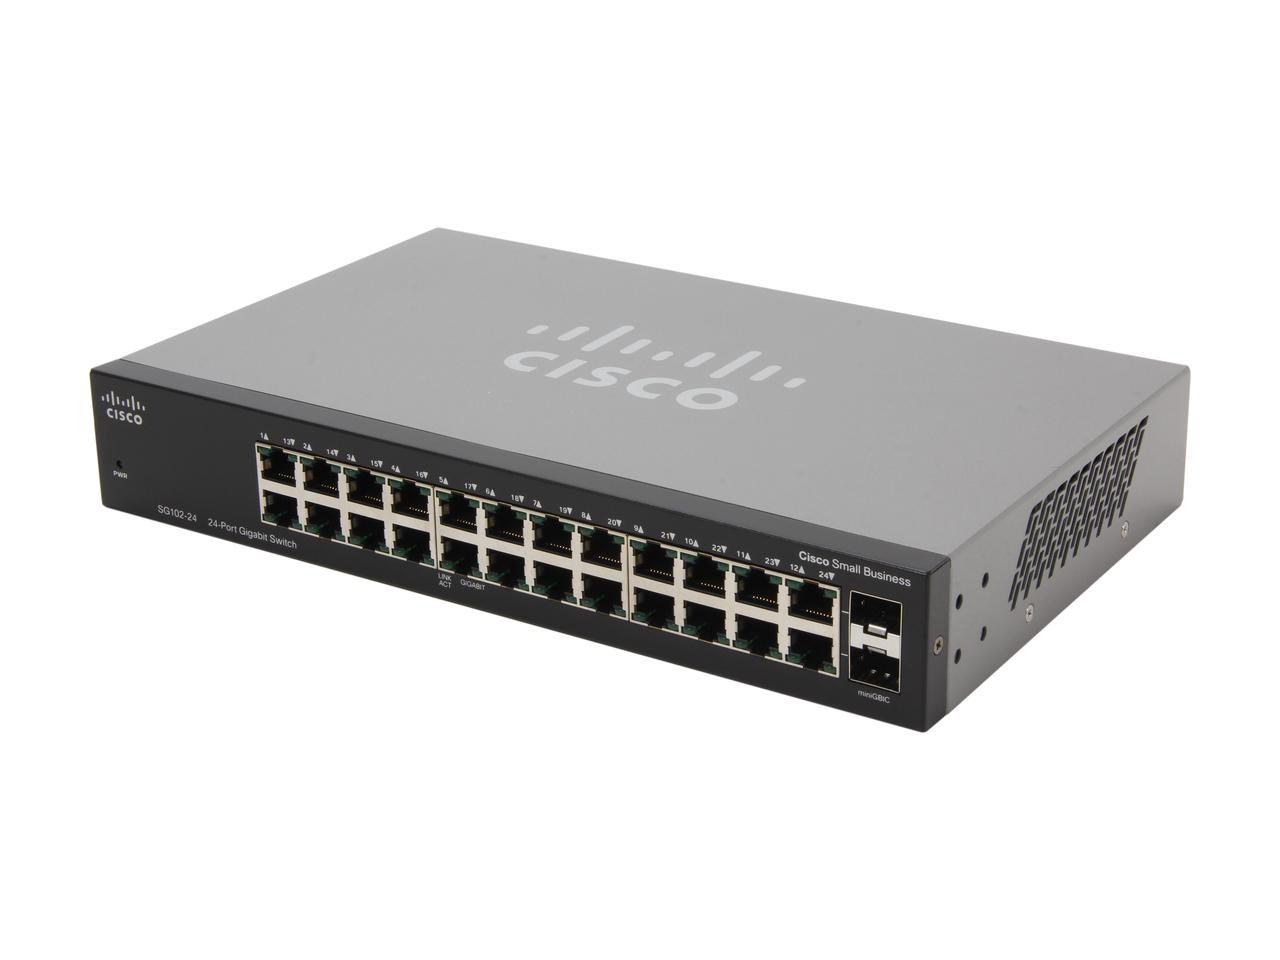 Cisco Compact 24-Port Gigabit Switch with 2 Combo Mini-GBIC Ports (SG102-24)